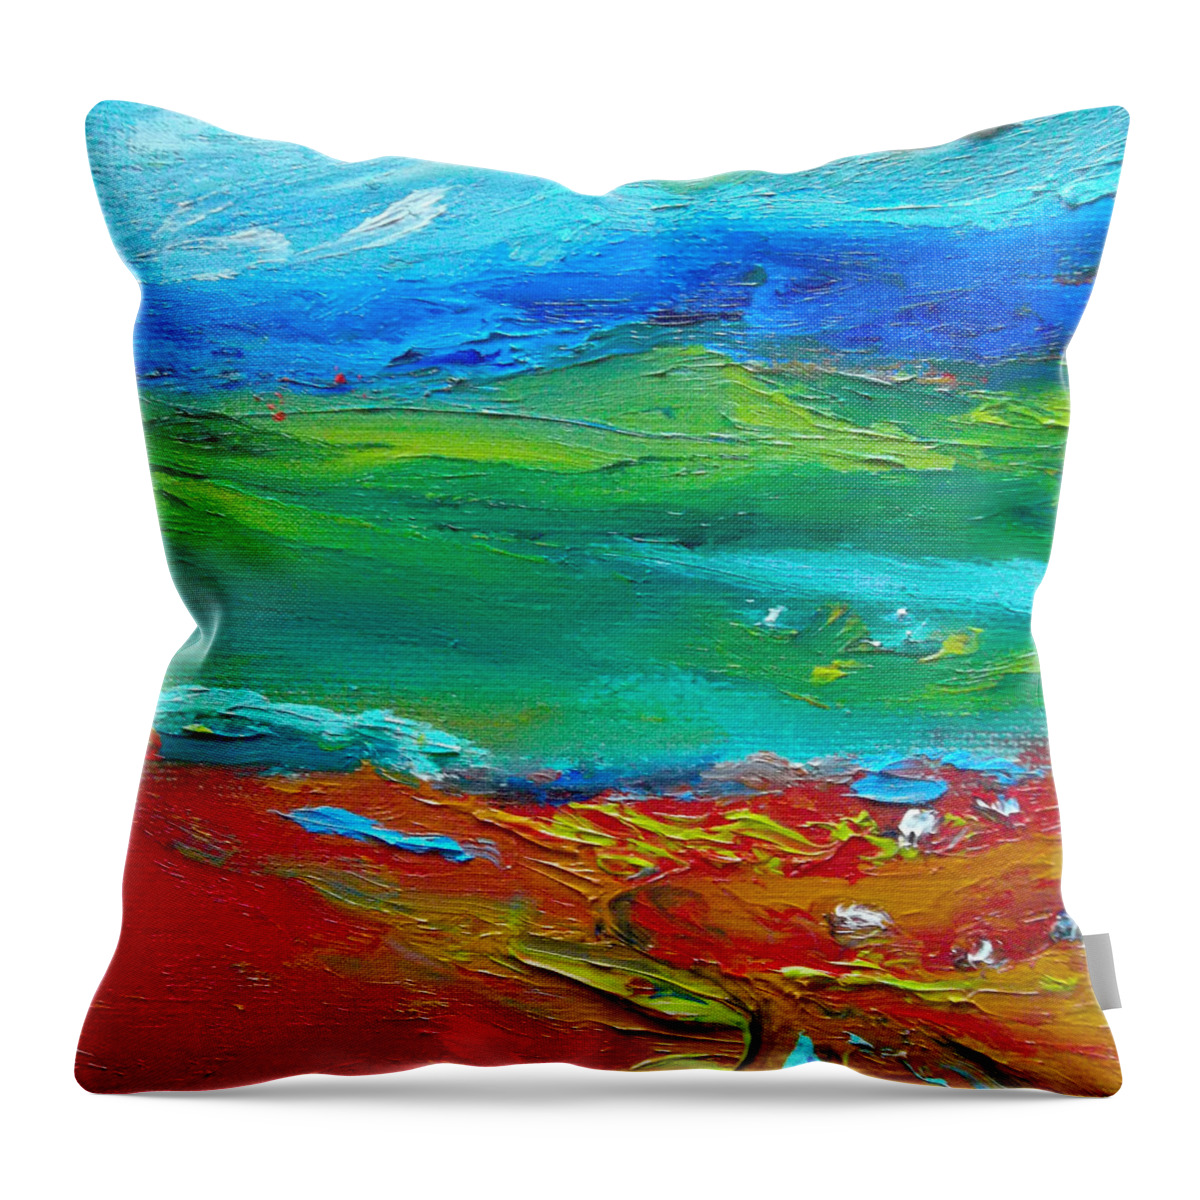 Abstract Throw Pillow featuring the painting Mountain View by Susan Esbensen